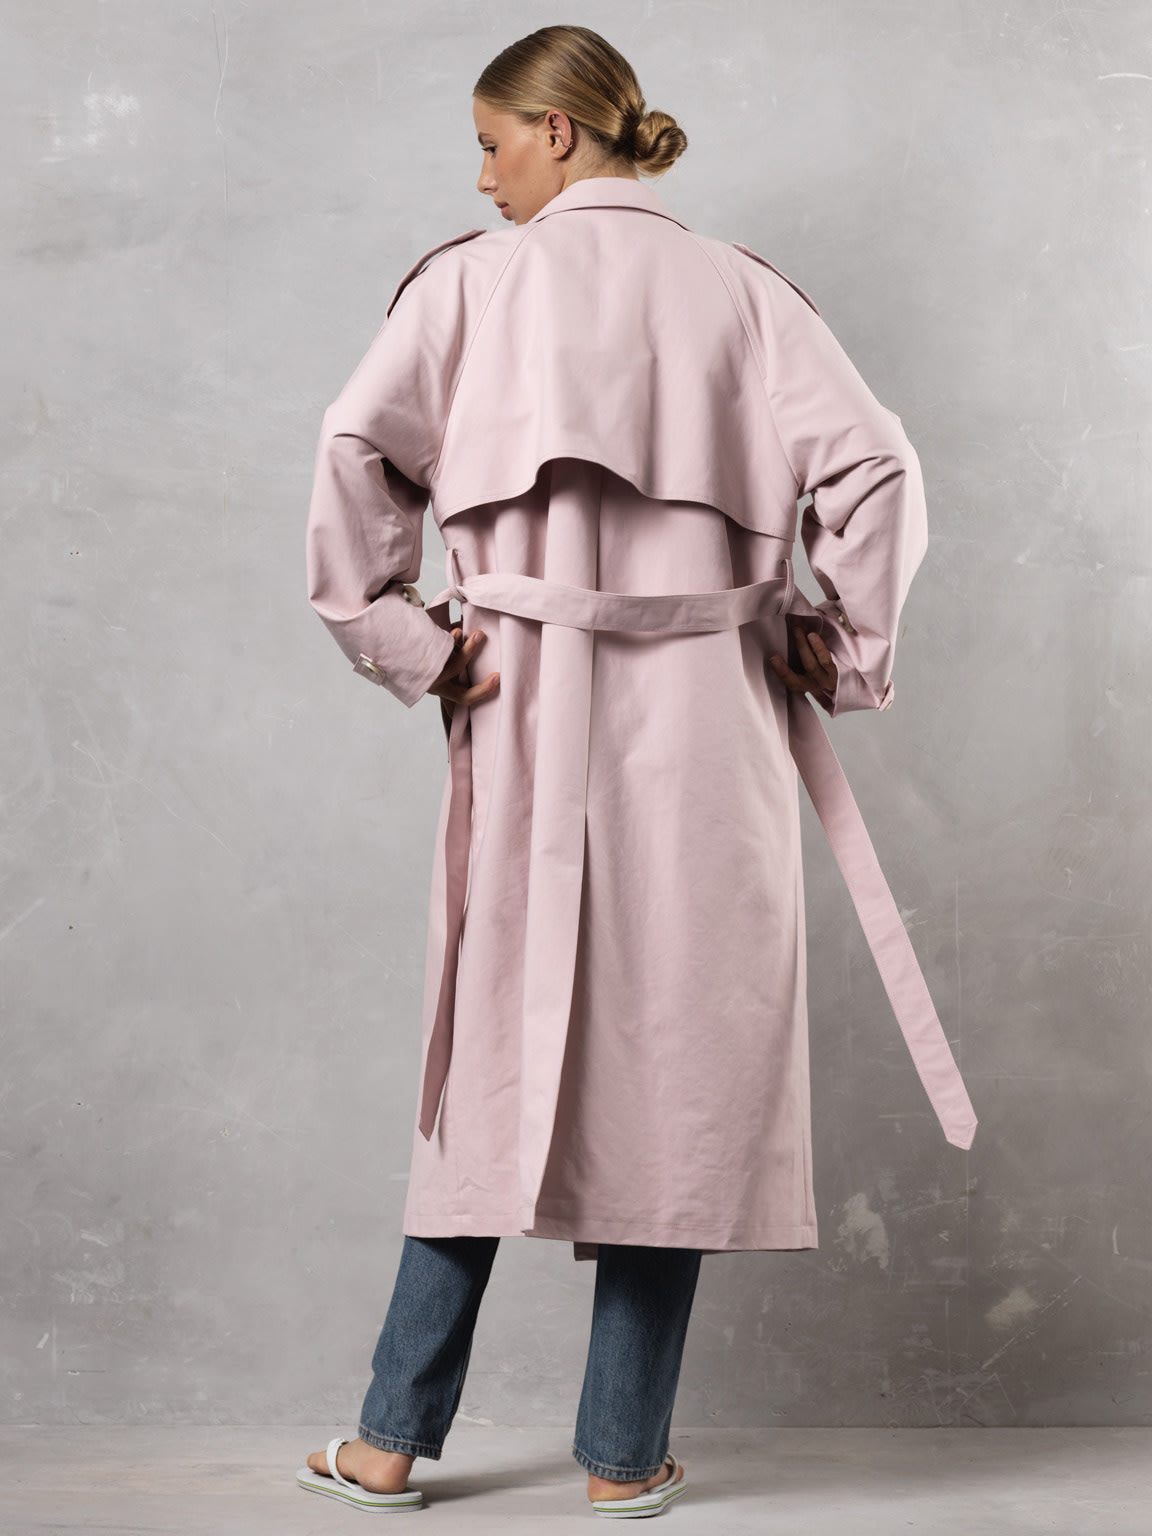 BOBBY CANVAS TRENCHCOAT - LIGHT PINK